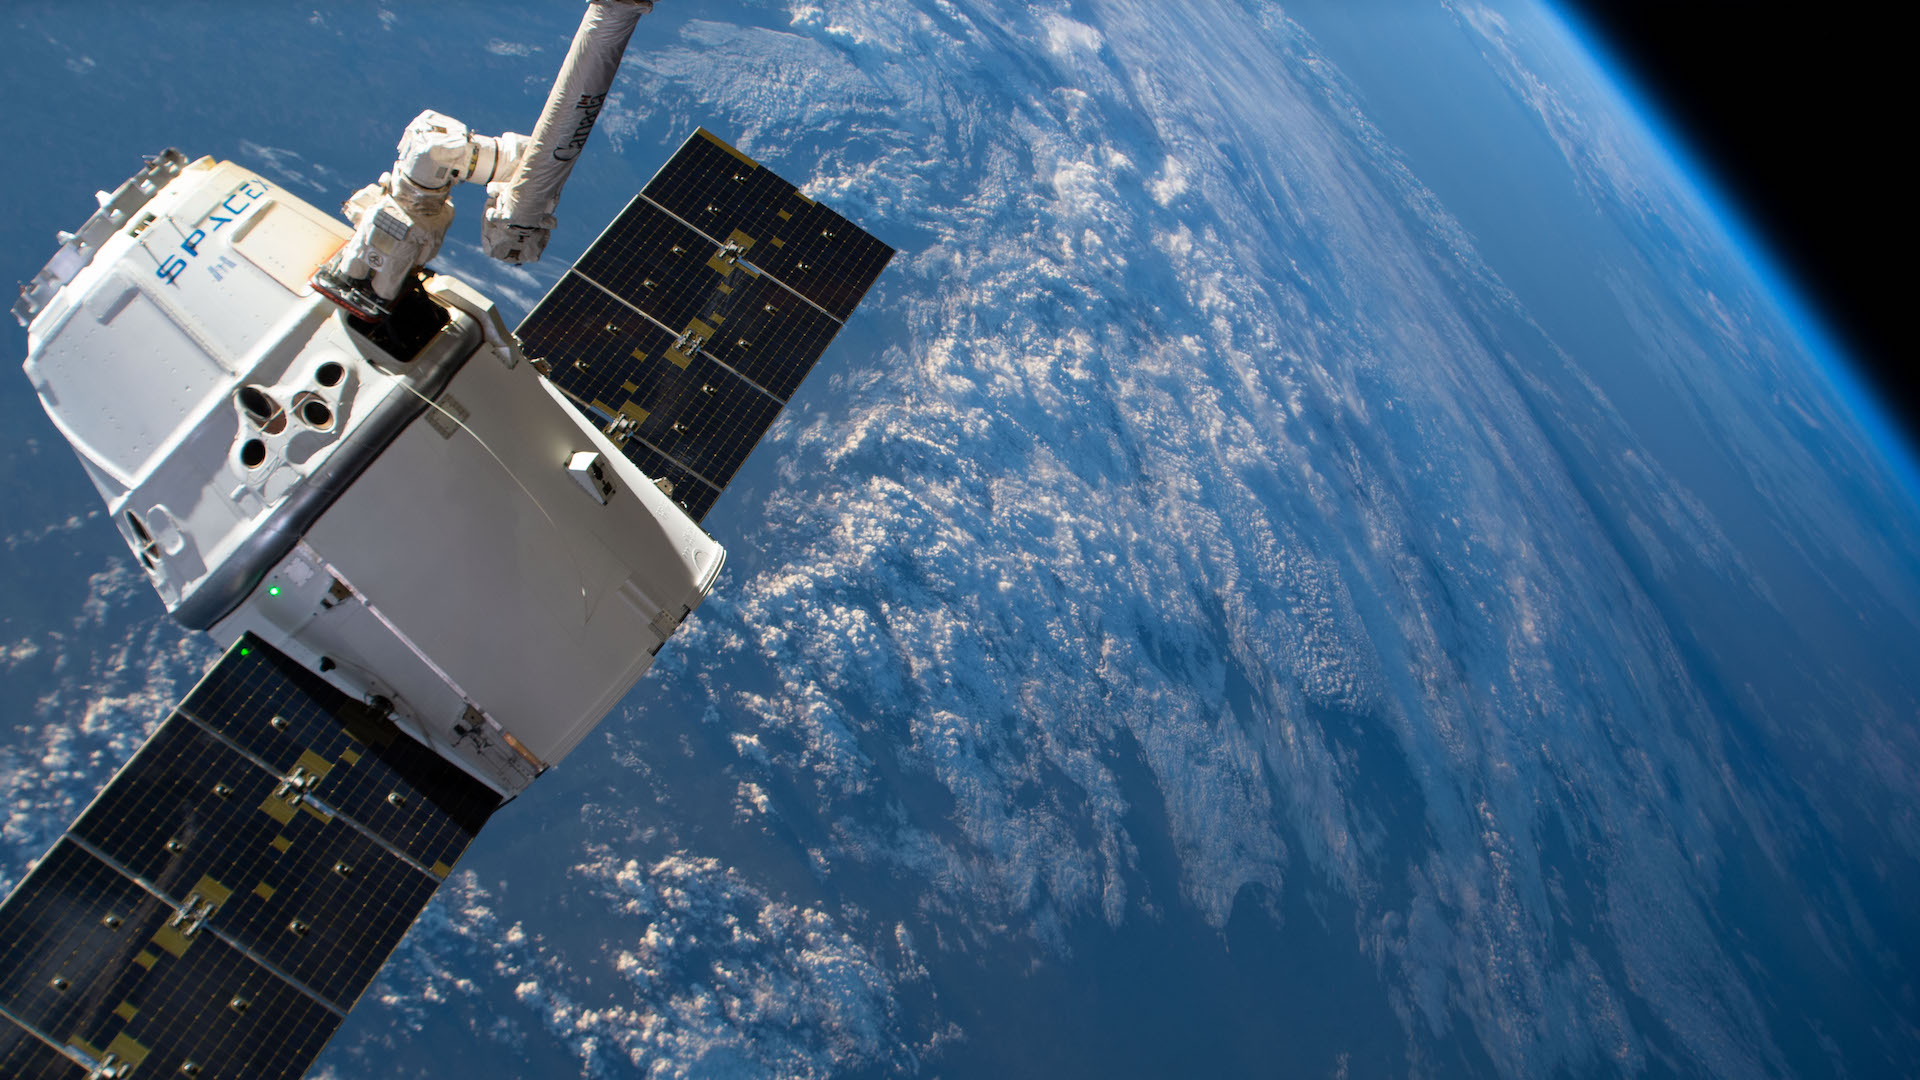 SpaceX Cargo Dragon Docked to International Space Station (ISS)